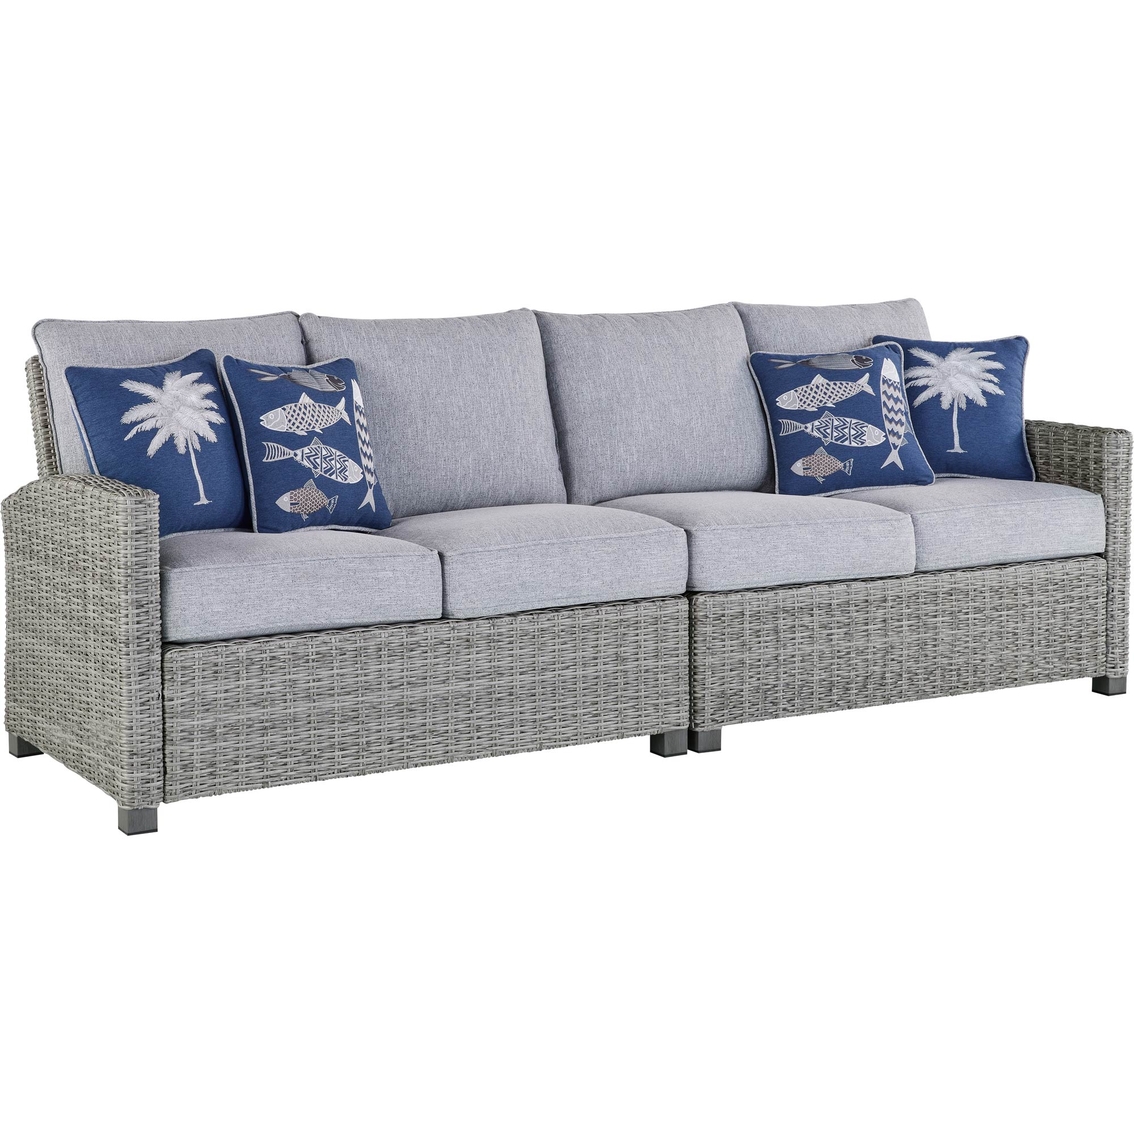 Signature Design by Ashley Naples Beach Outdoor 3 pc. Sectional - Image 2 of 10